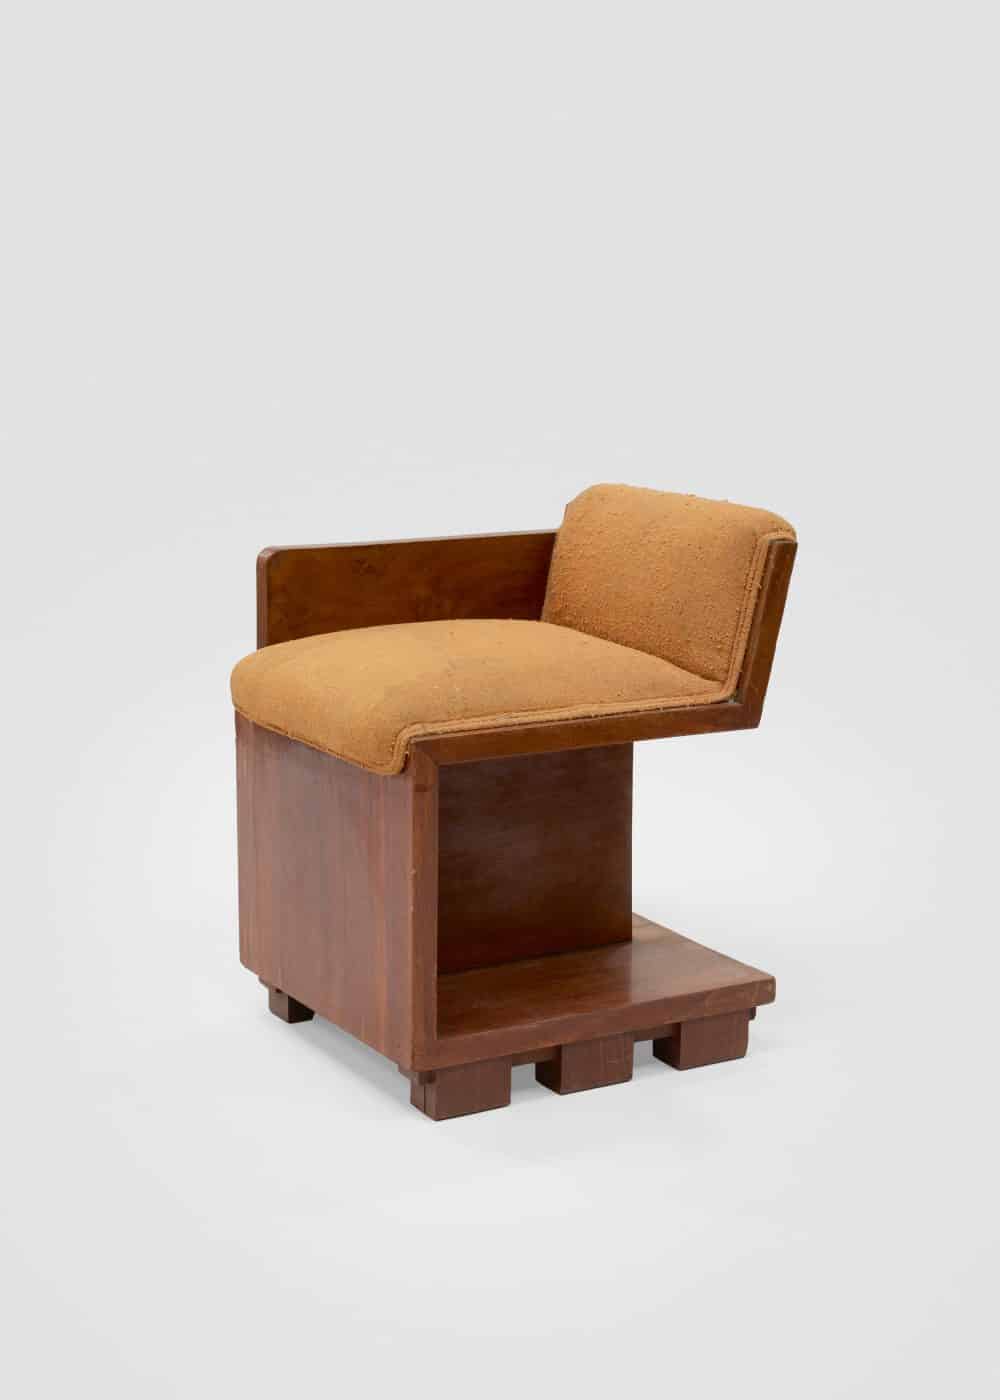 Single-arm stool from the 1930s